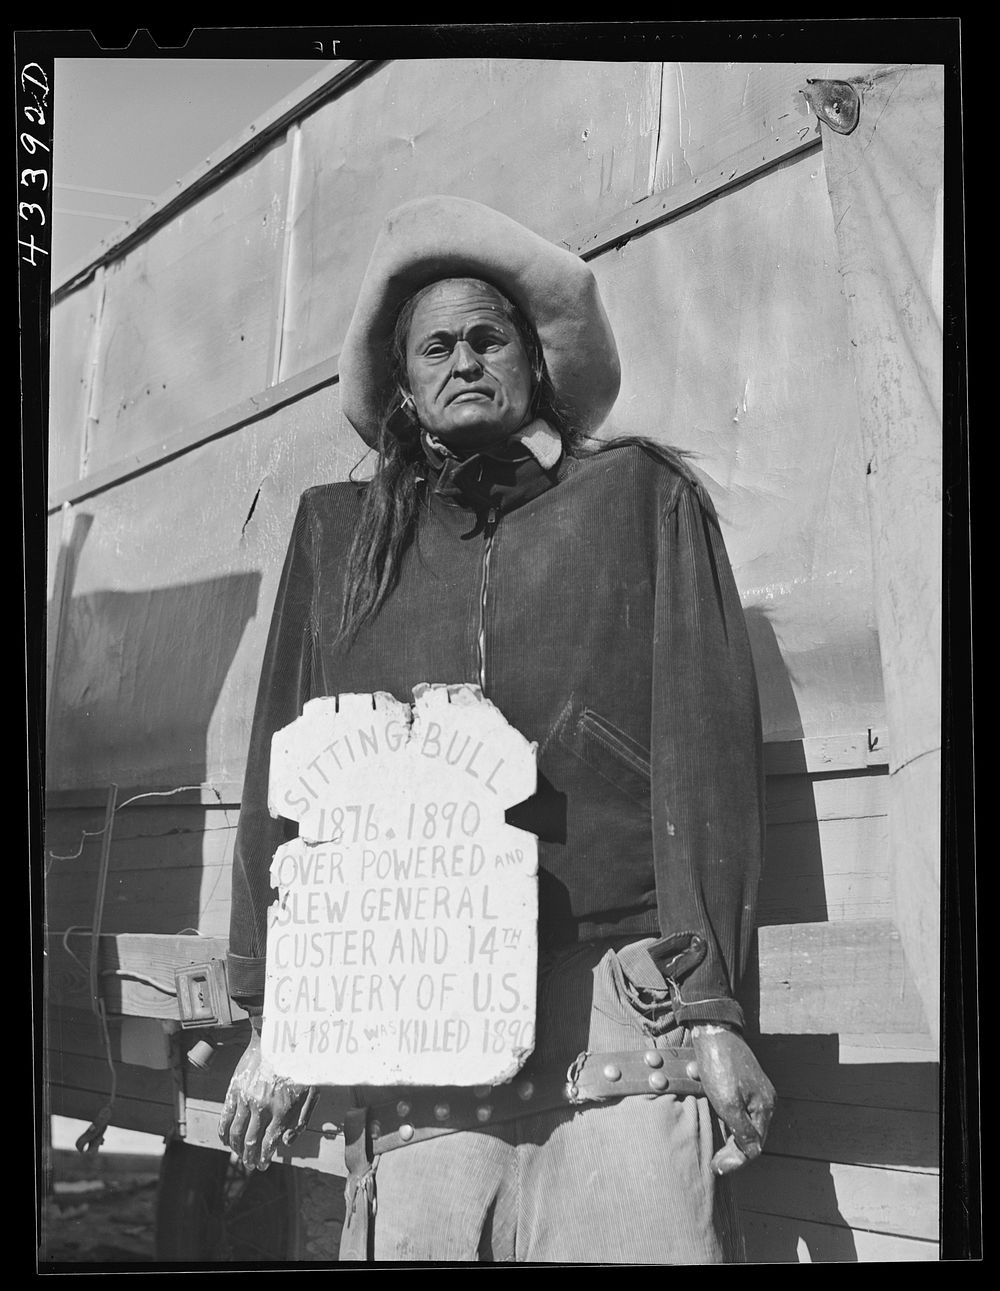 [Untitled photo, possibly related to: An effigy of Sitting Bull, part of the exhibit of the travelling sideshow "crime…